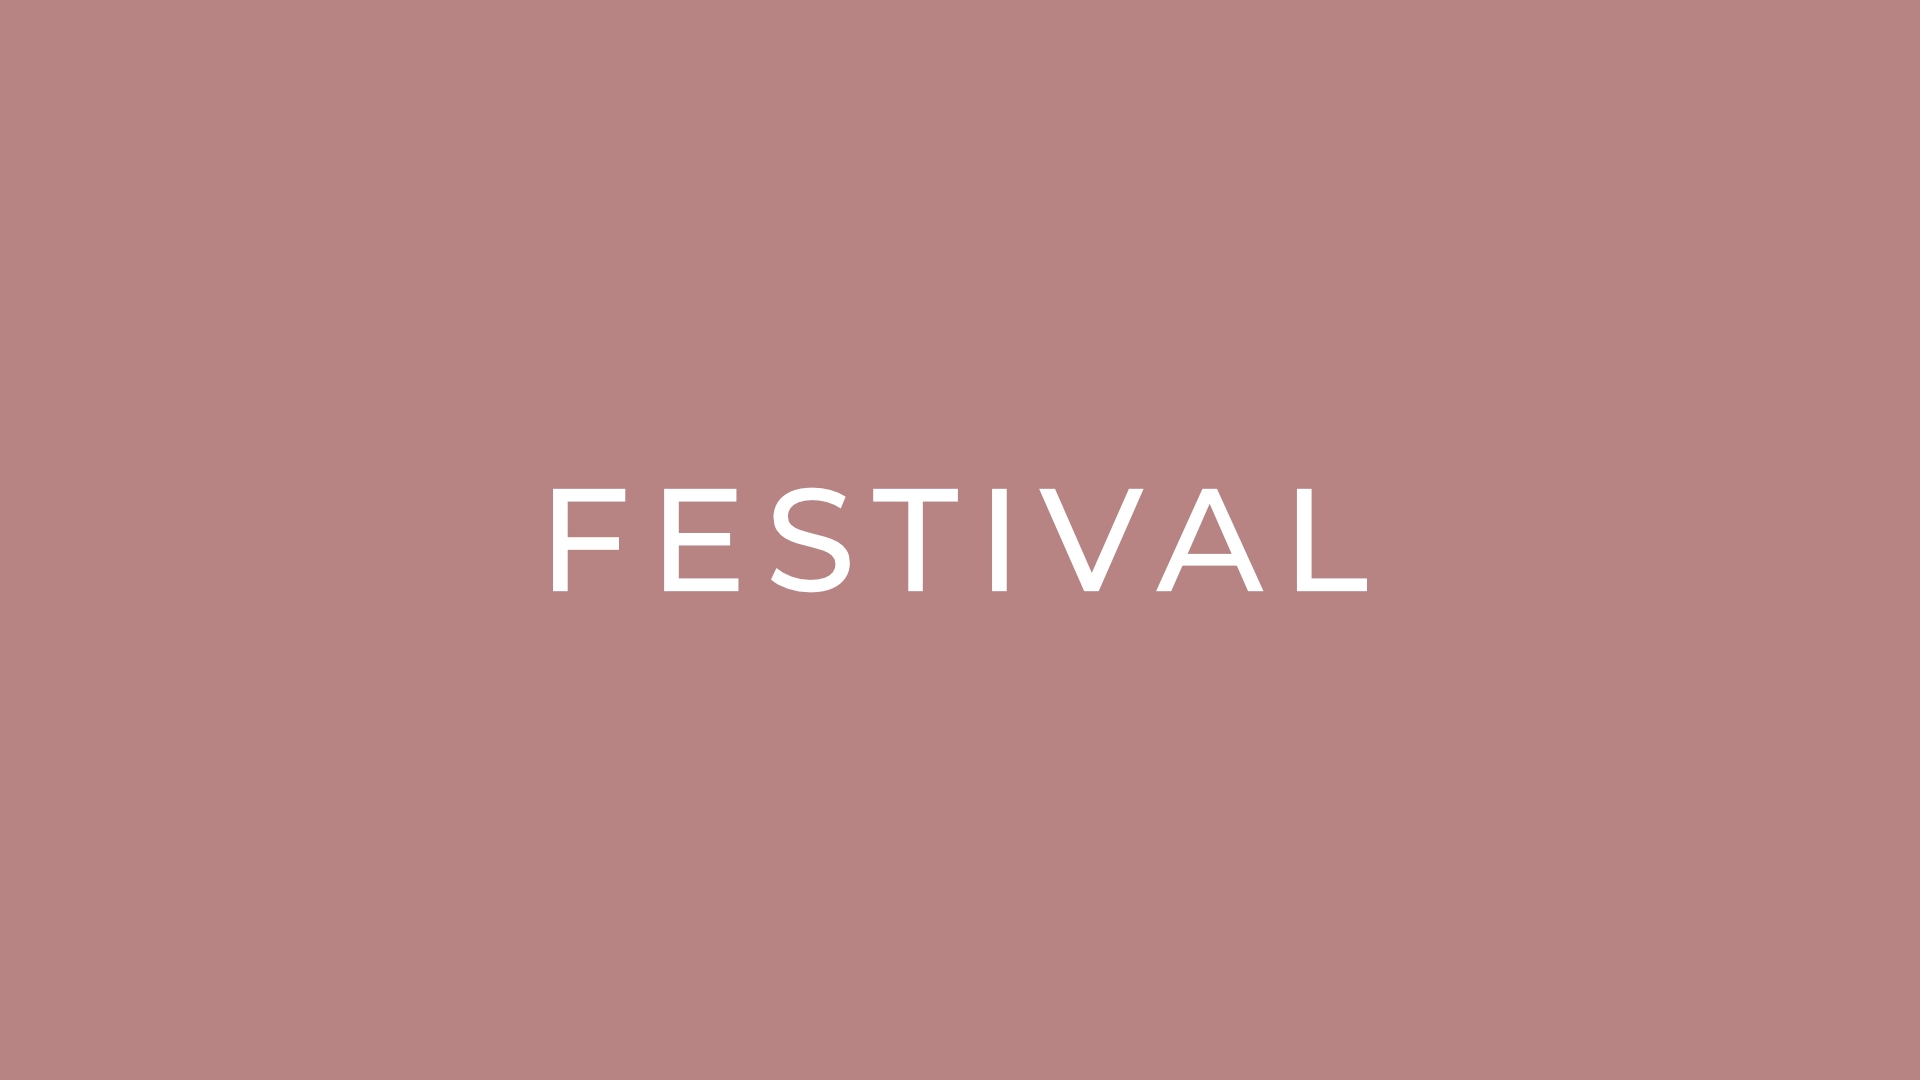 Festival: Centrale Festival 12 – A moveable identity